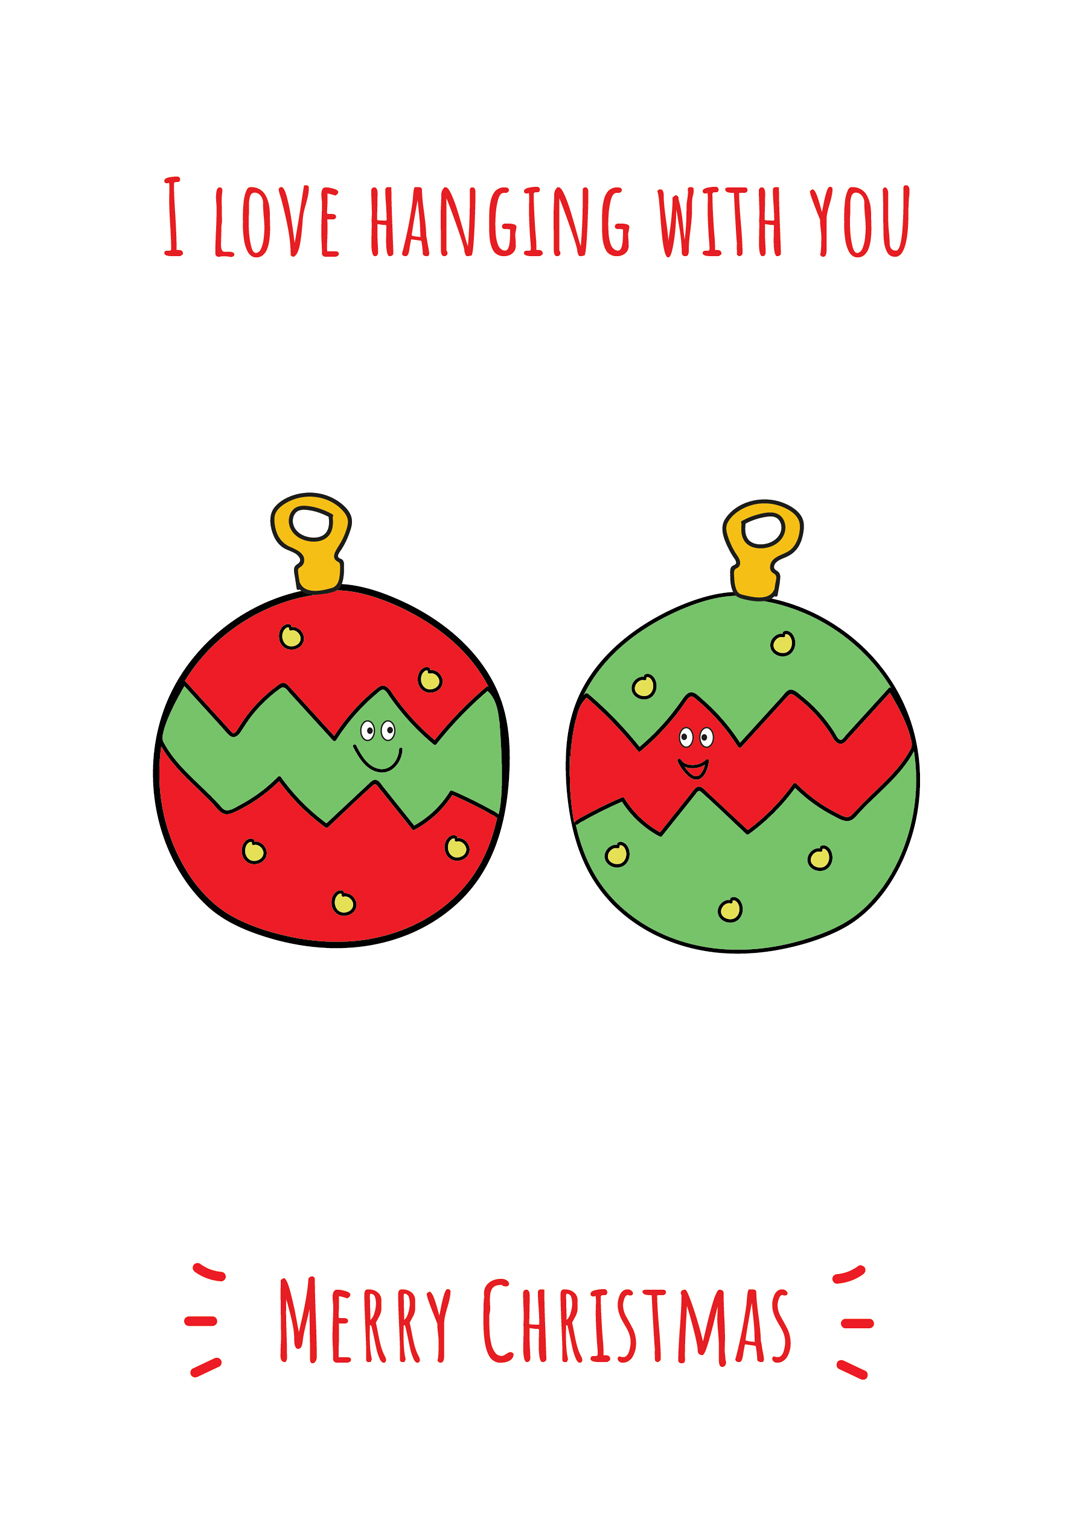 I Love Hanging With You Christmas Card